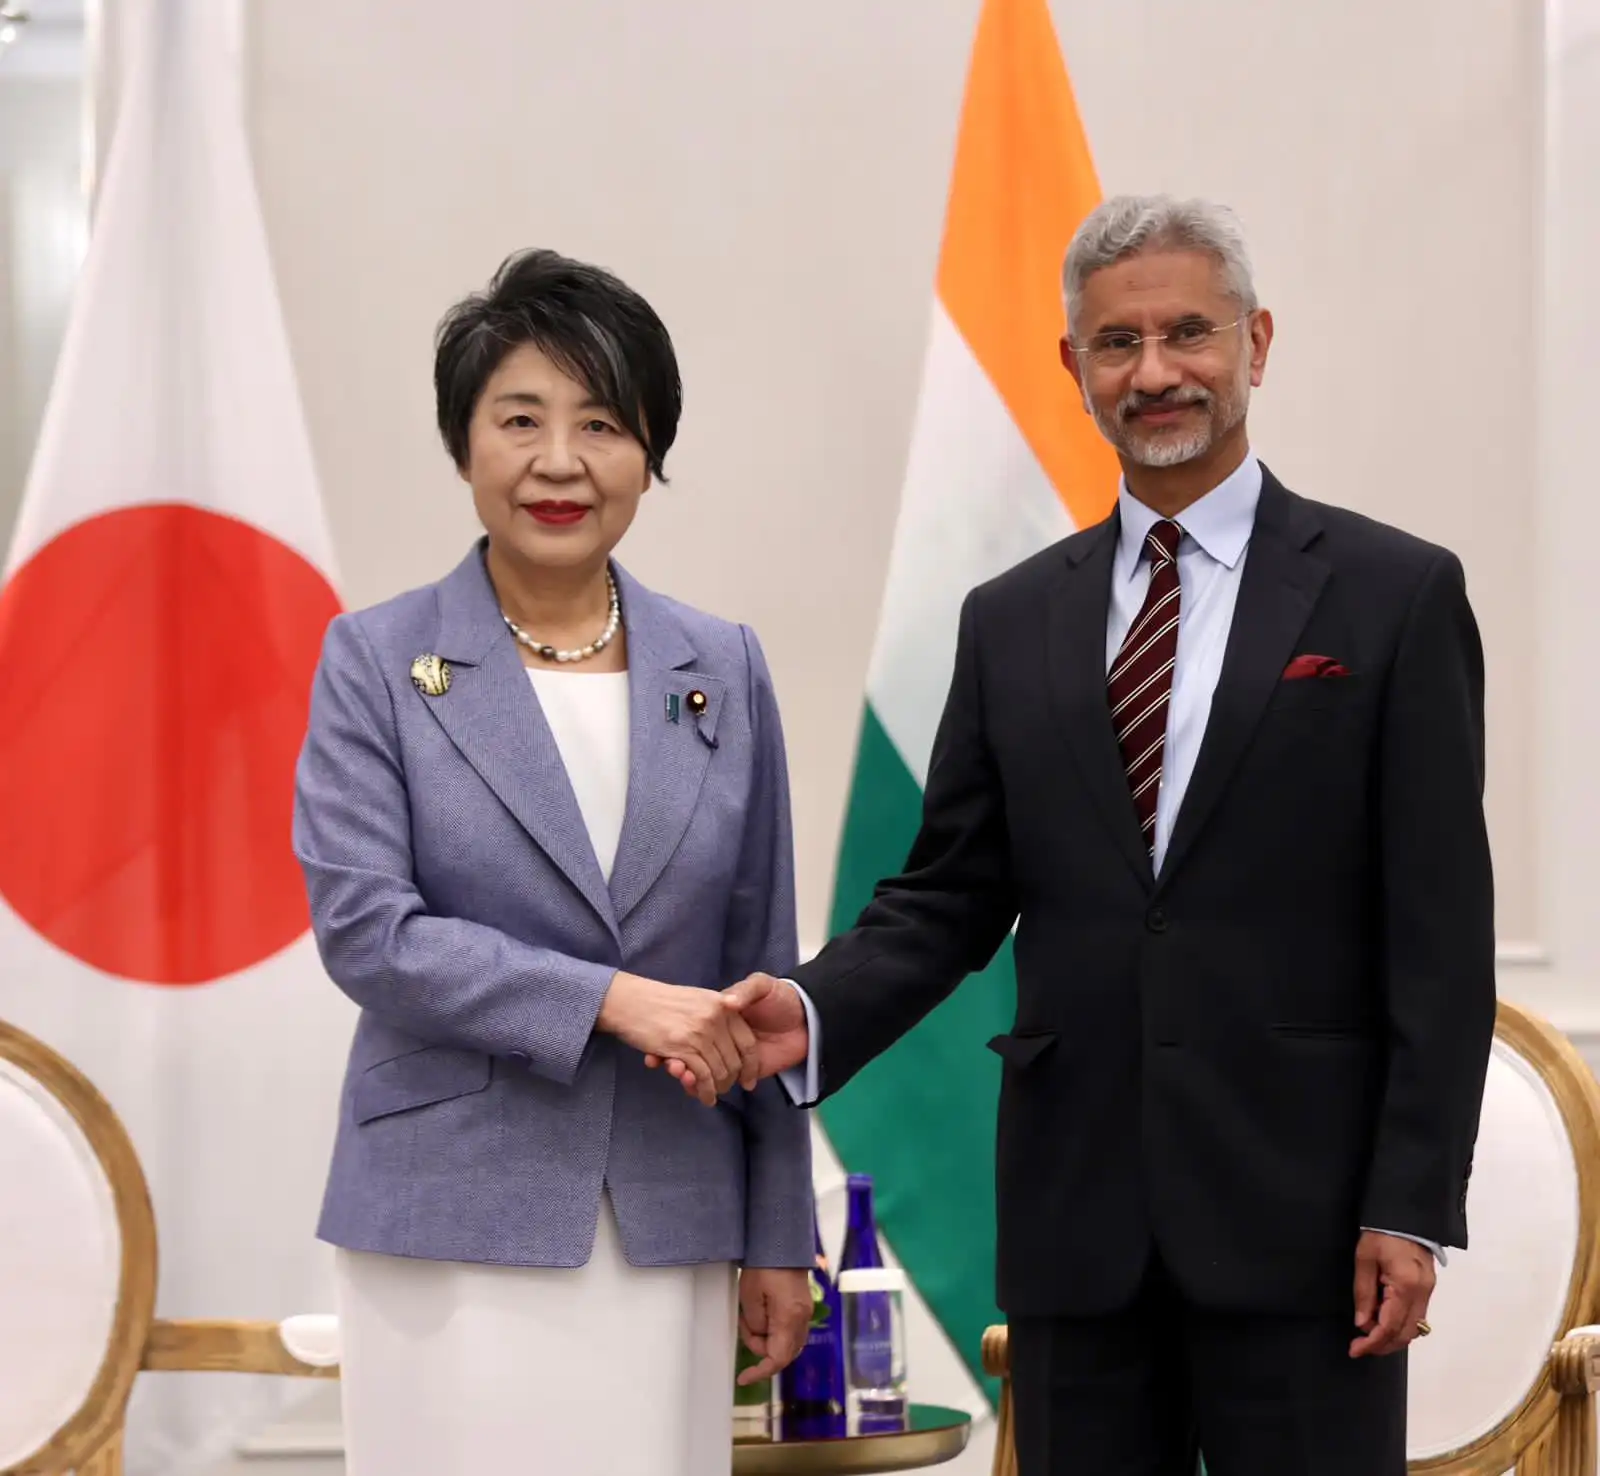 India and Japan discuss advancing high-speed railway project on UNGA sidelines